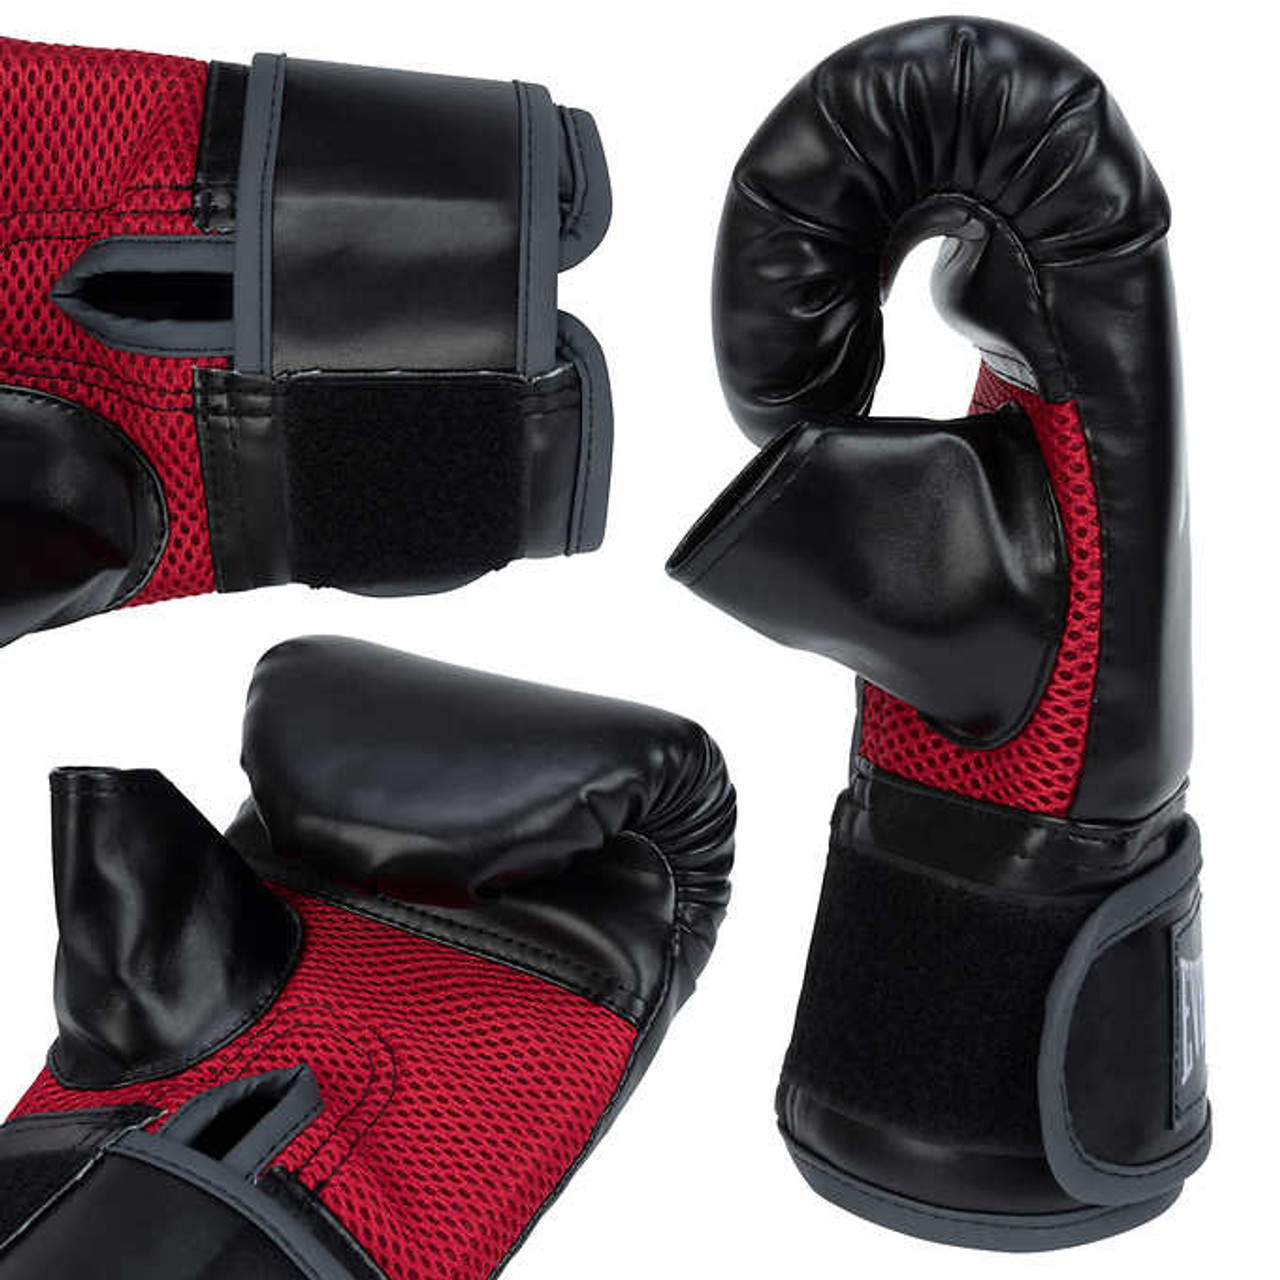 Everlast 100 lb. Heavy Bag, Gloves, and Heavy Bag Hanger Kit - Complete Workout - Chicken Pieces